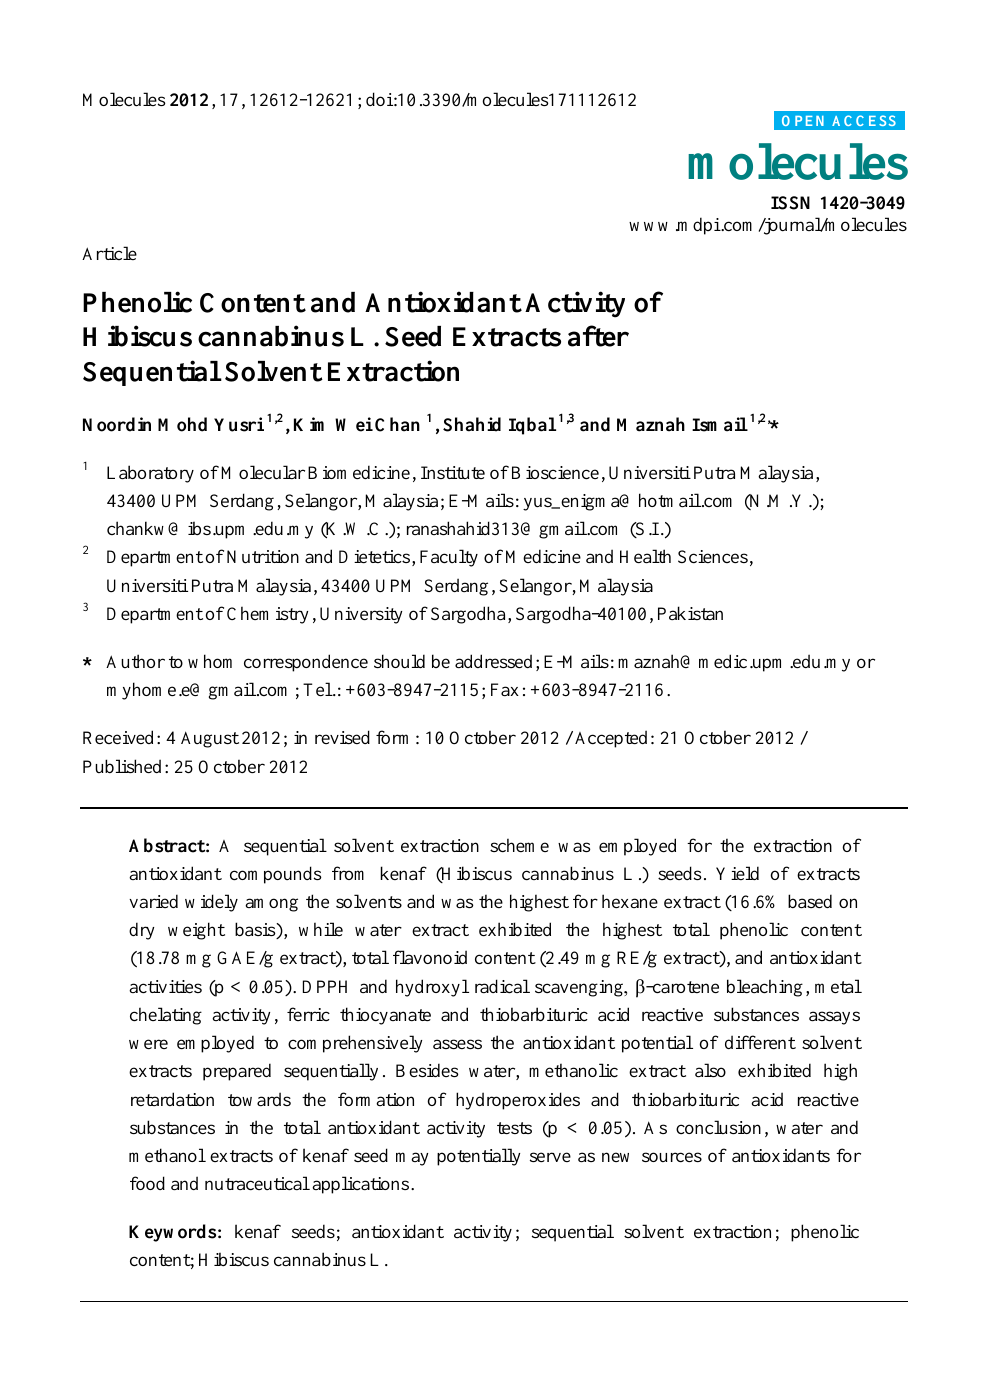 Phenolic Content And Antioxidant Activity Of Hibiscus Cannabinus L Seed Extracts After Sequential Solvent Extraction Topic Of Research Paper In Biological Sciences Download Scholarly Article Pdf And Read For Free On